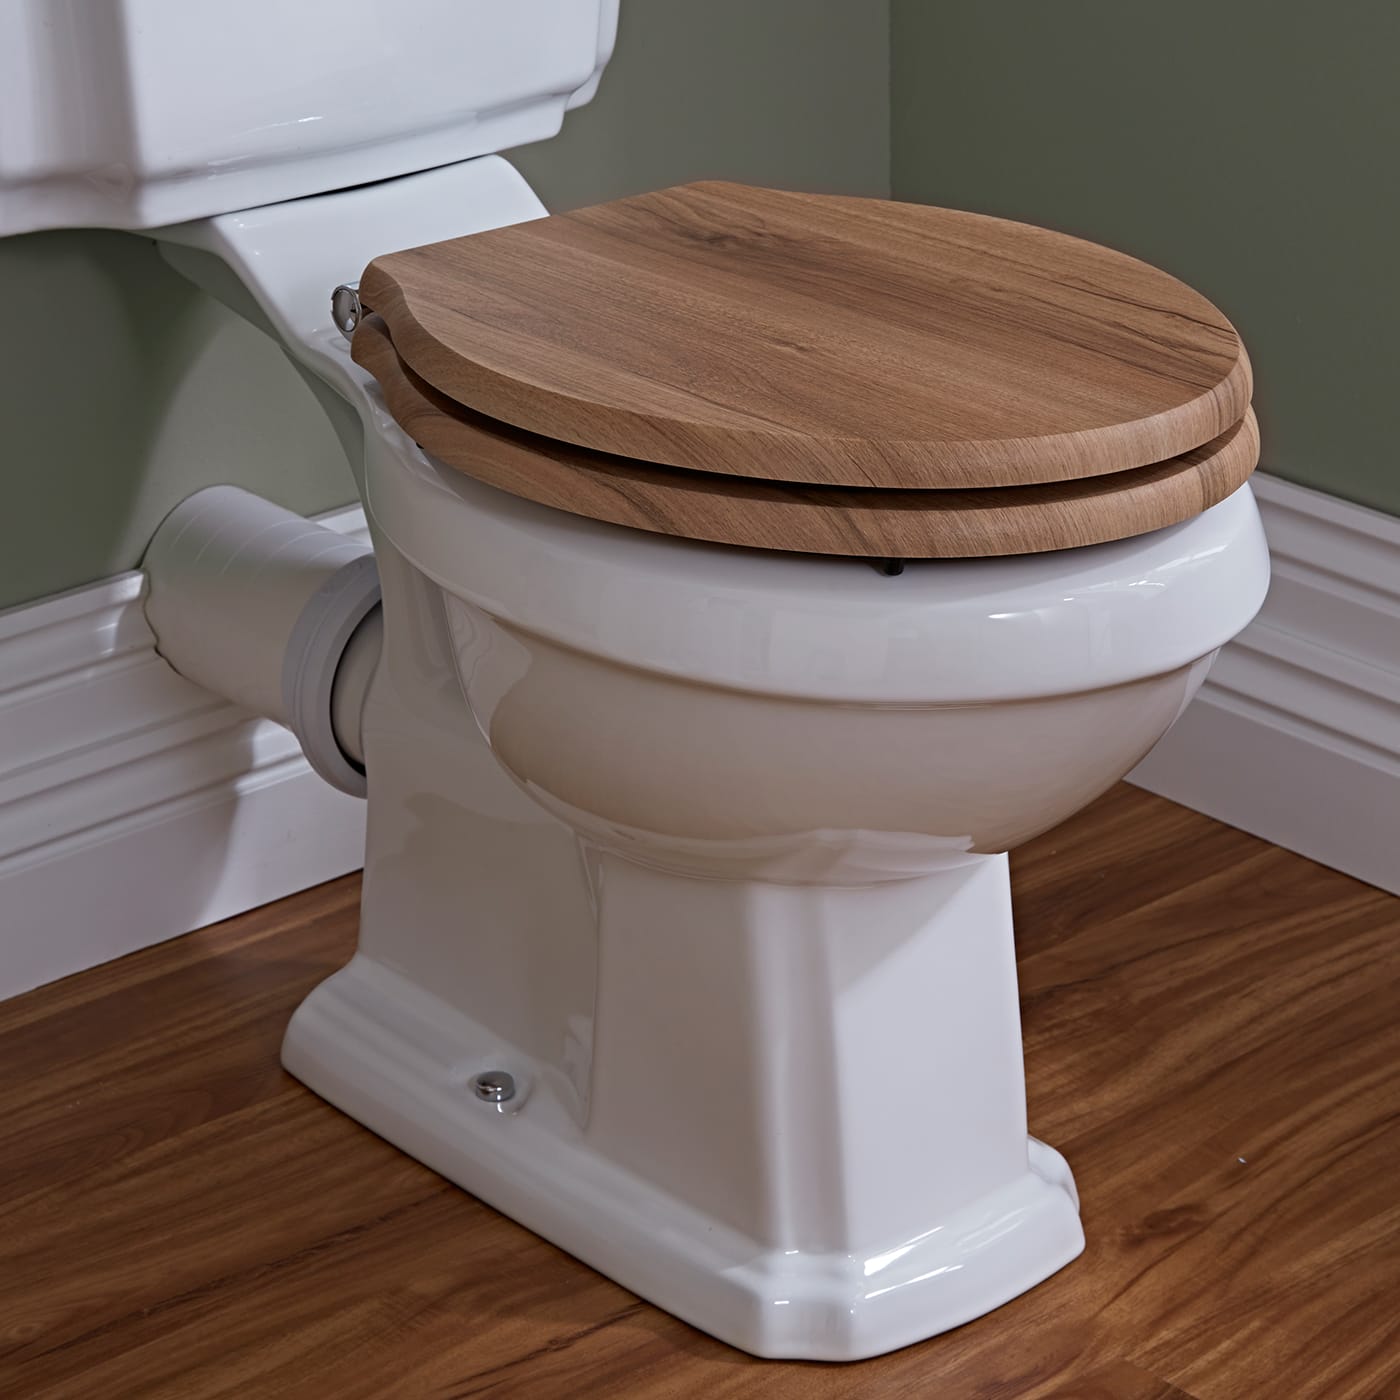 replace toilet seat size